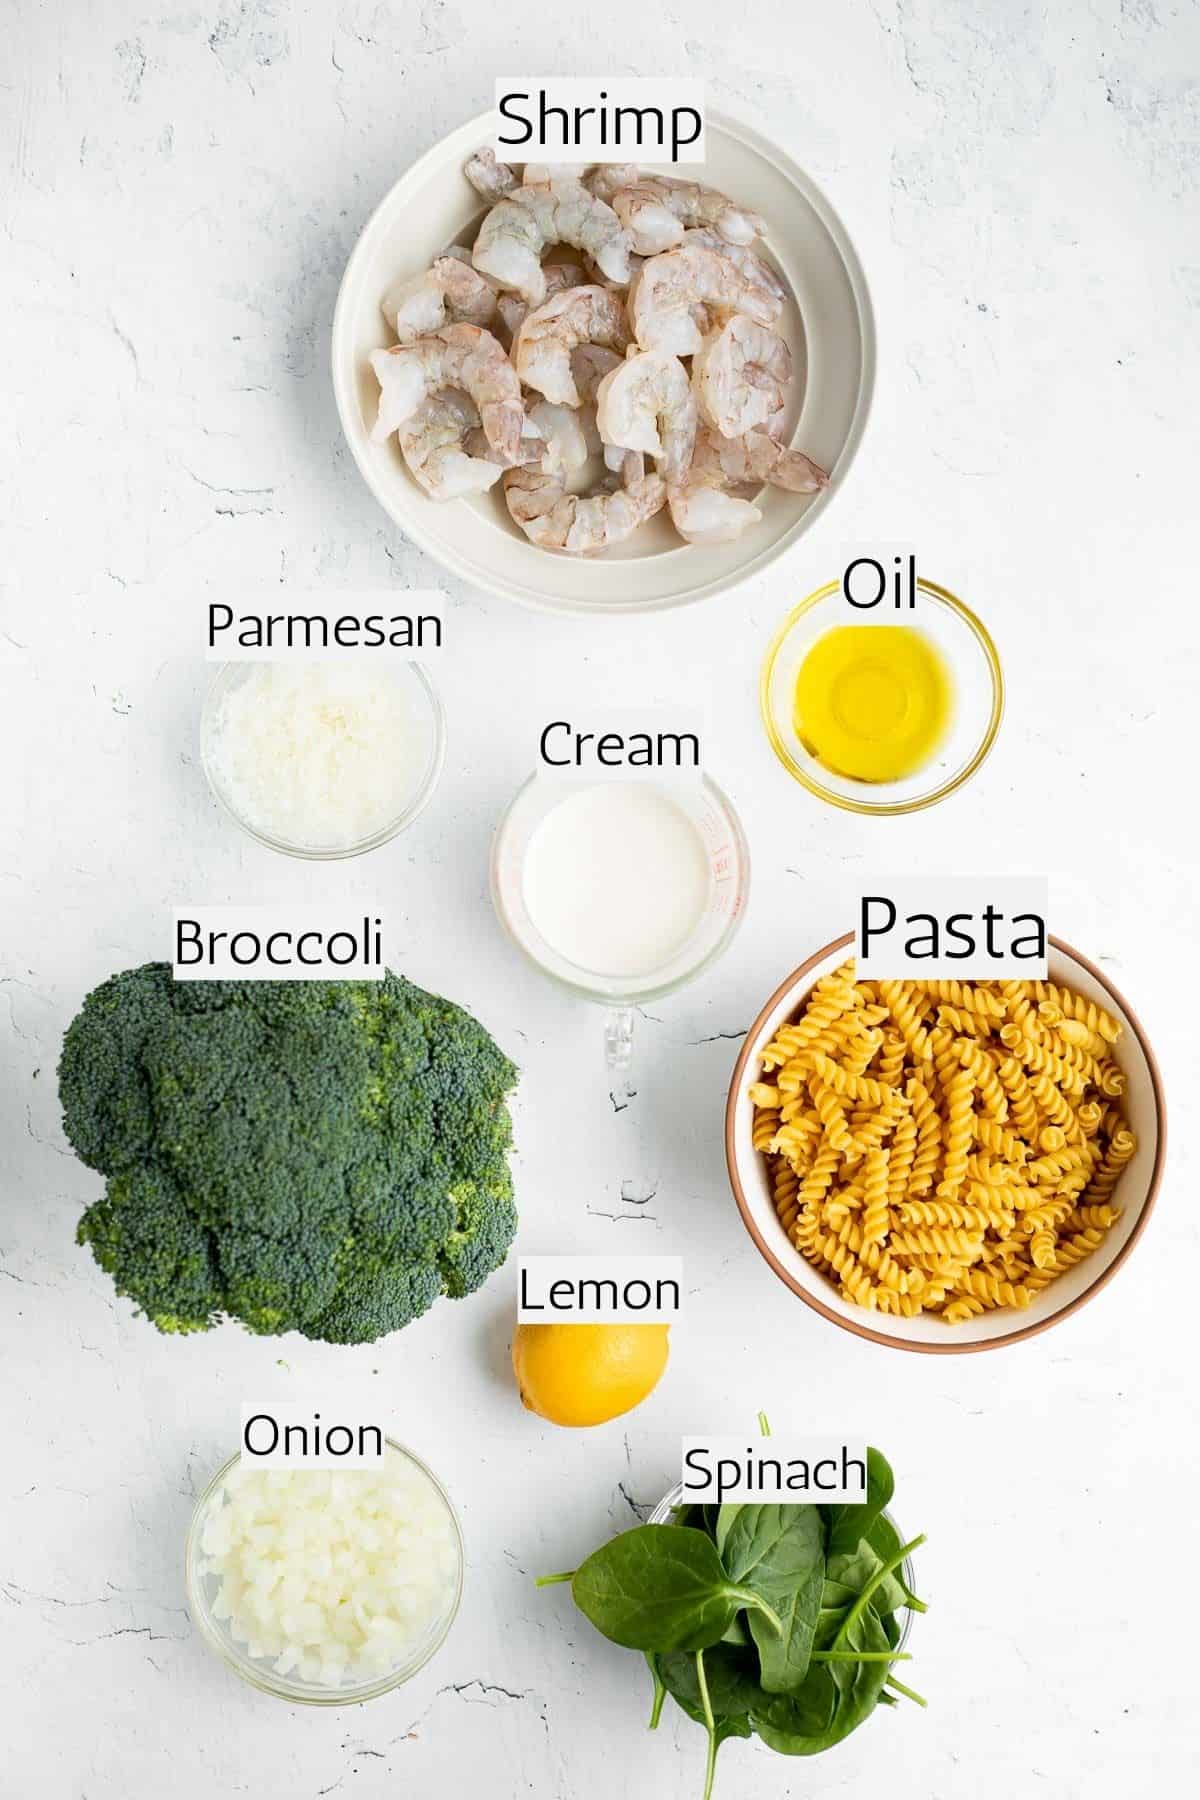 ingredients to make shrimp and broccoli pasta labeled with black text.